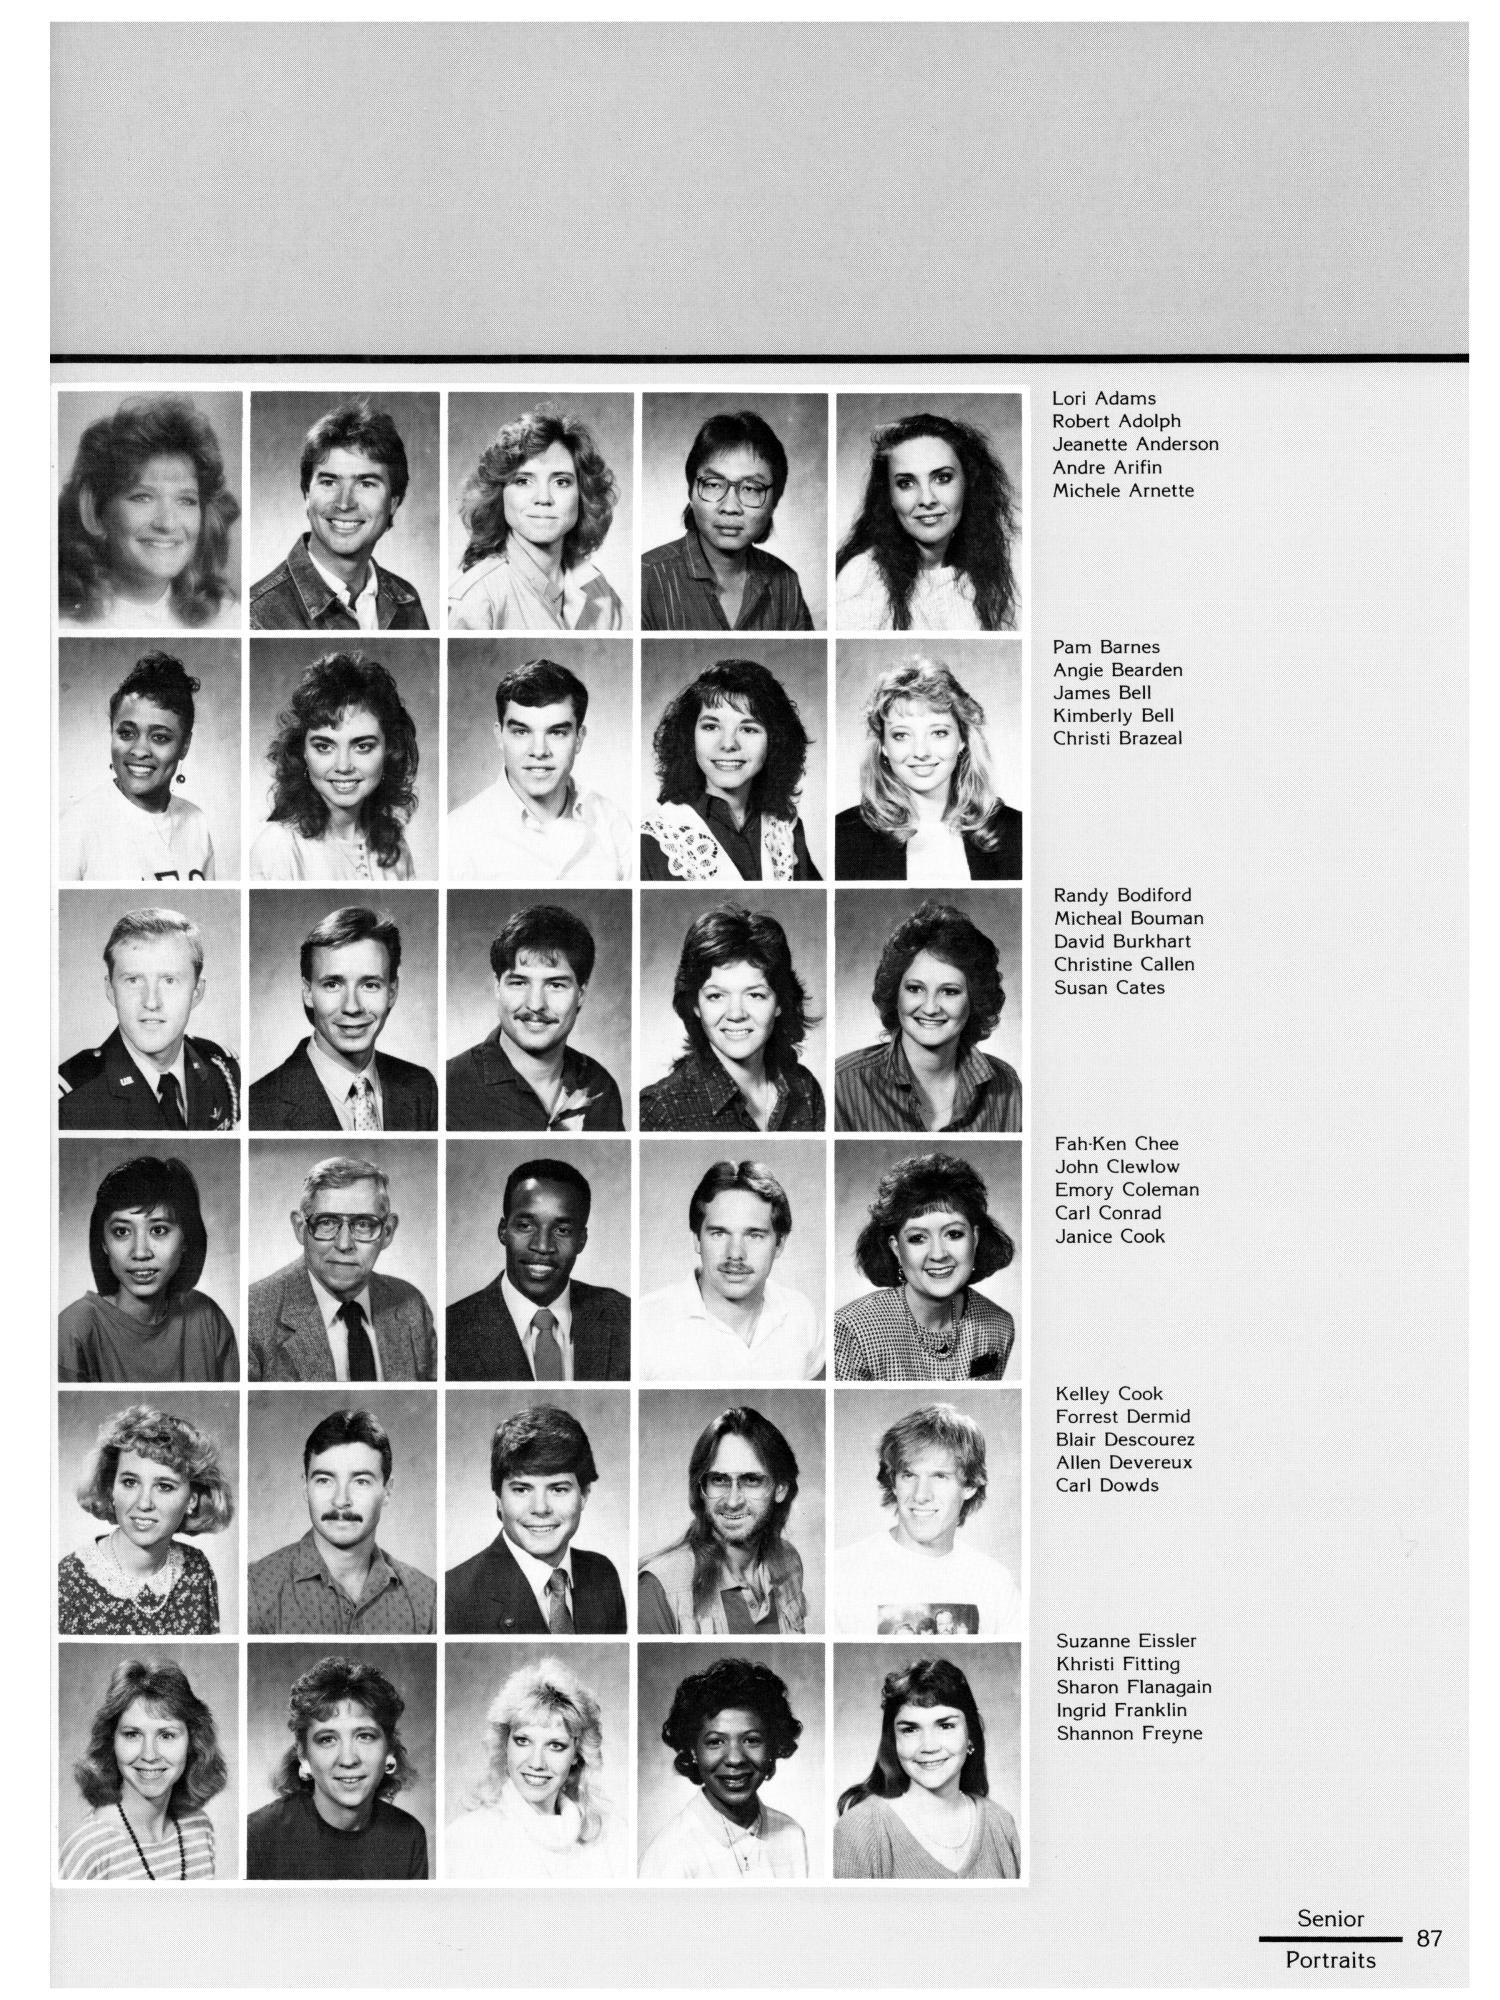 The Aerie, Yearbook of North Texas State University, 1988
                                                
                                                    87
                                                